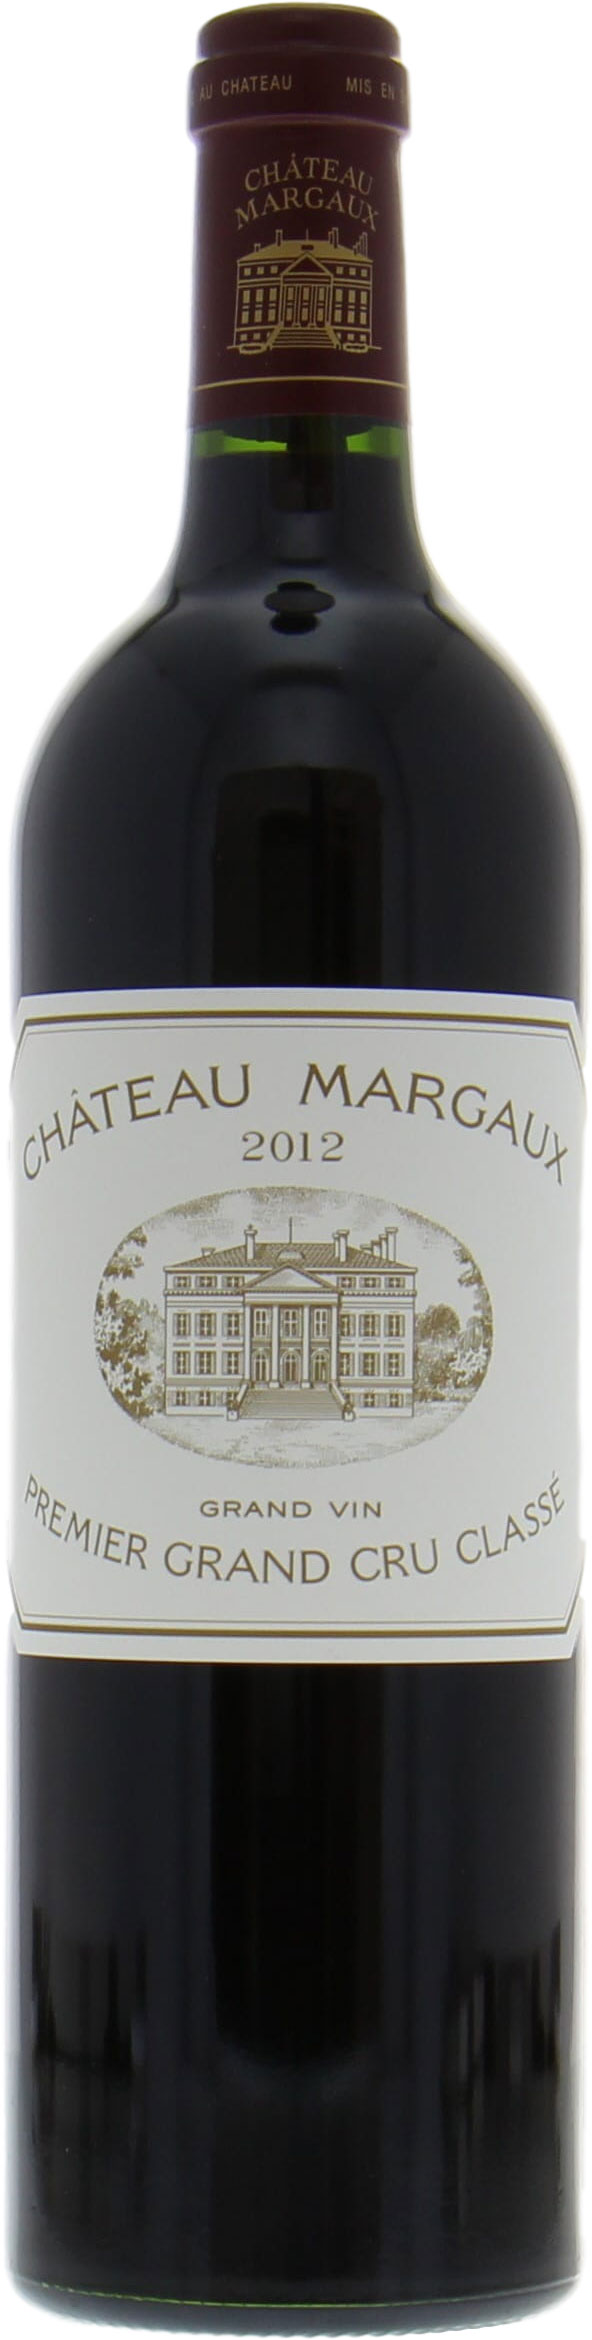 Chateau Margaux - Chateau Margaux 2012 From Original Wooden Case